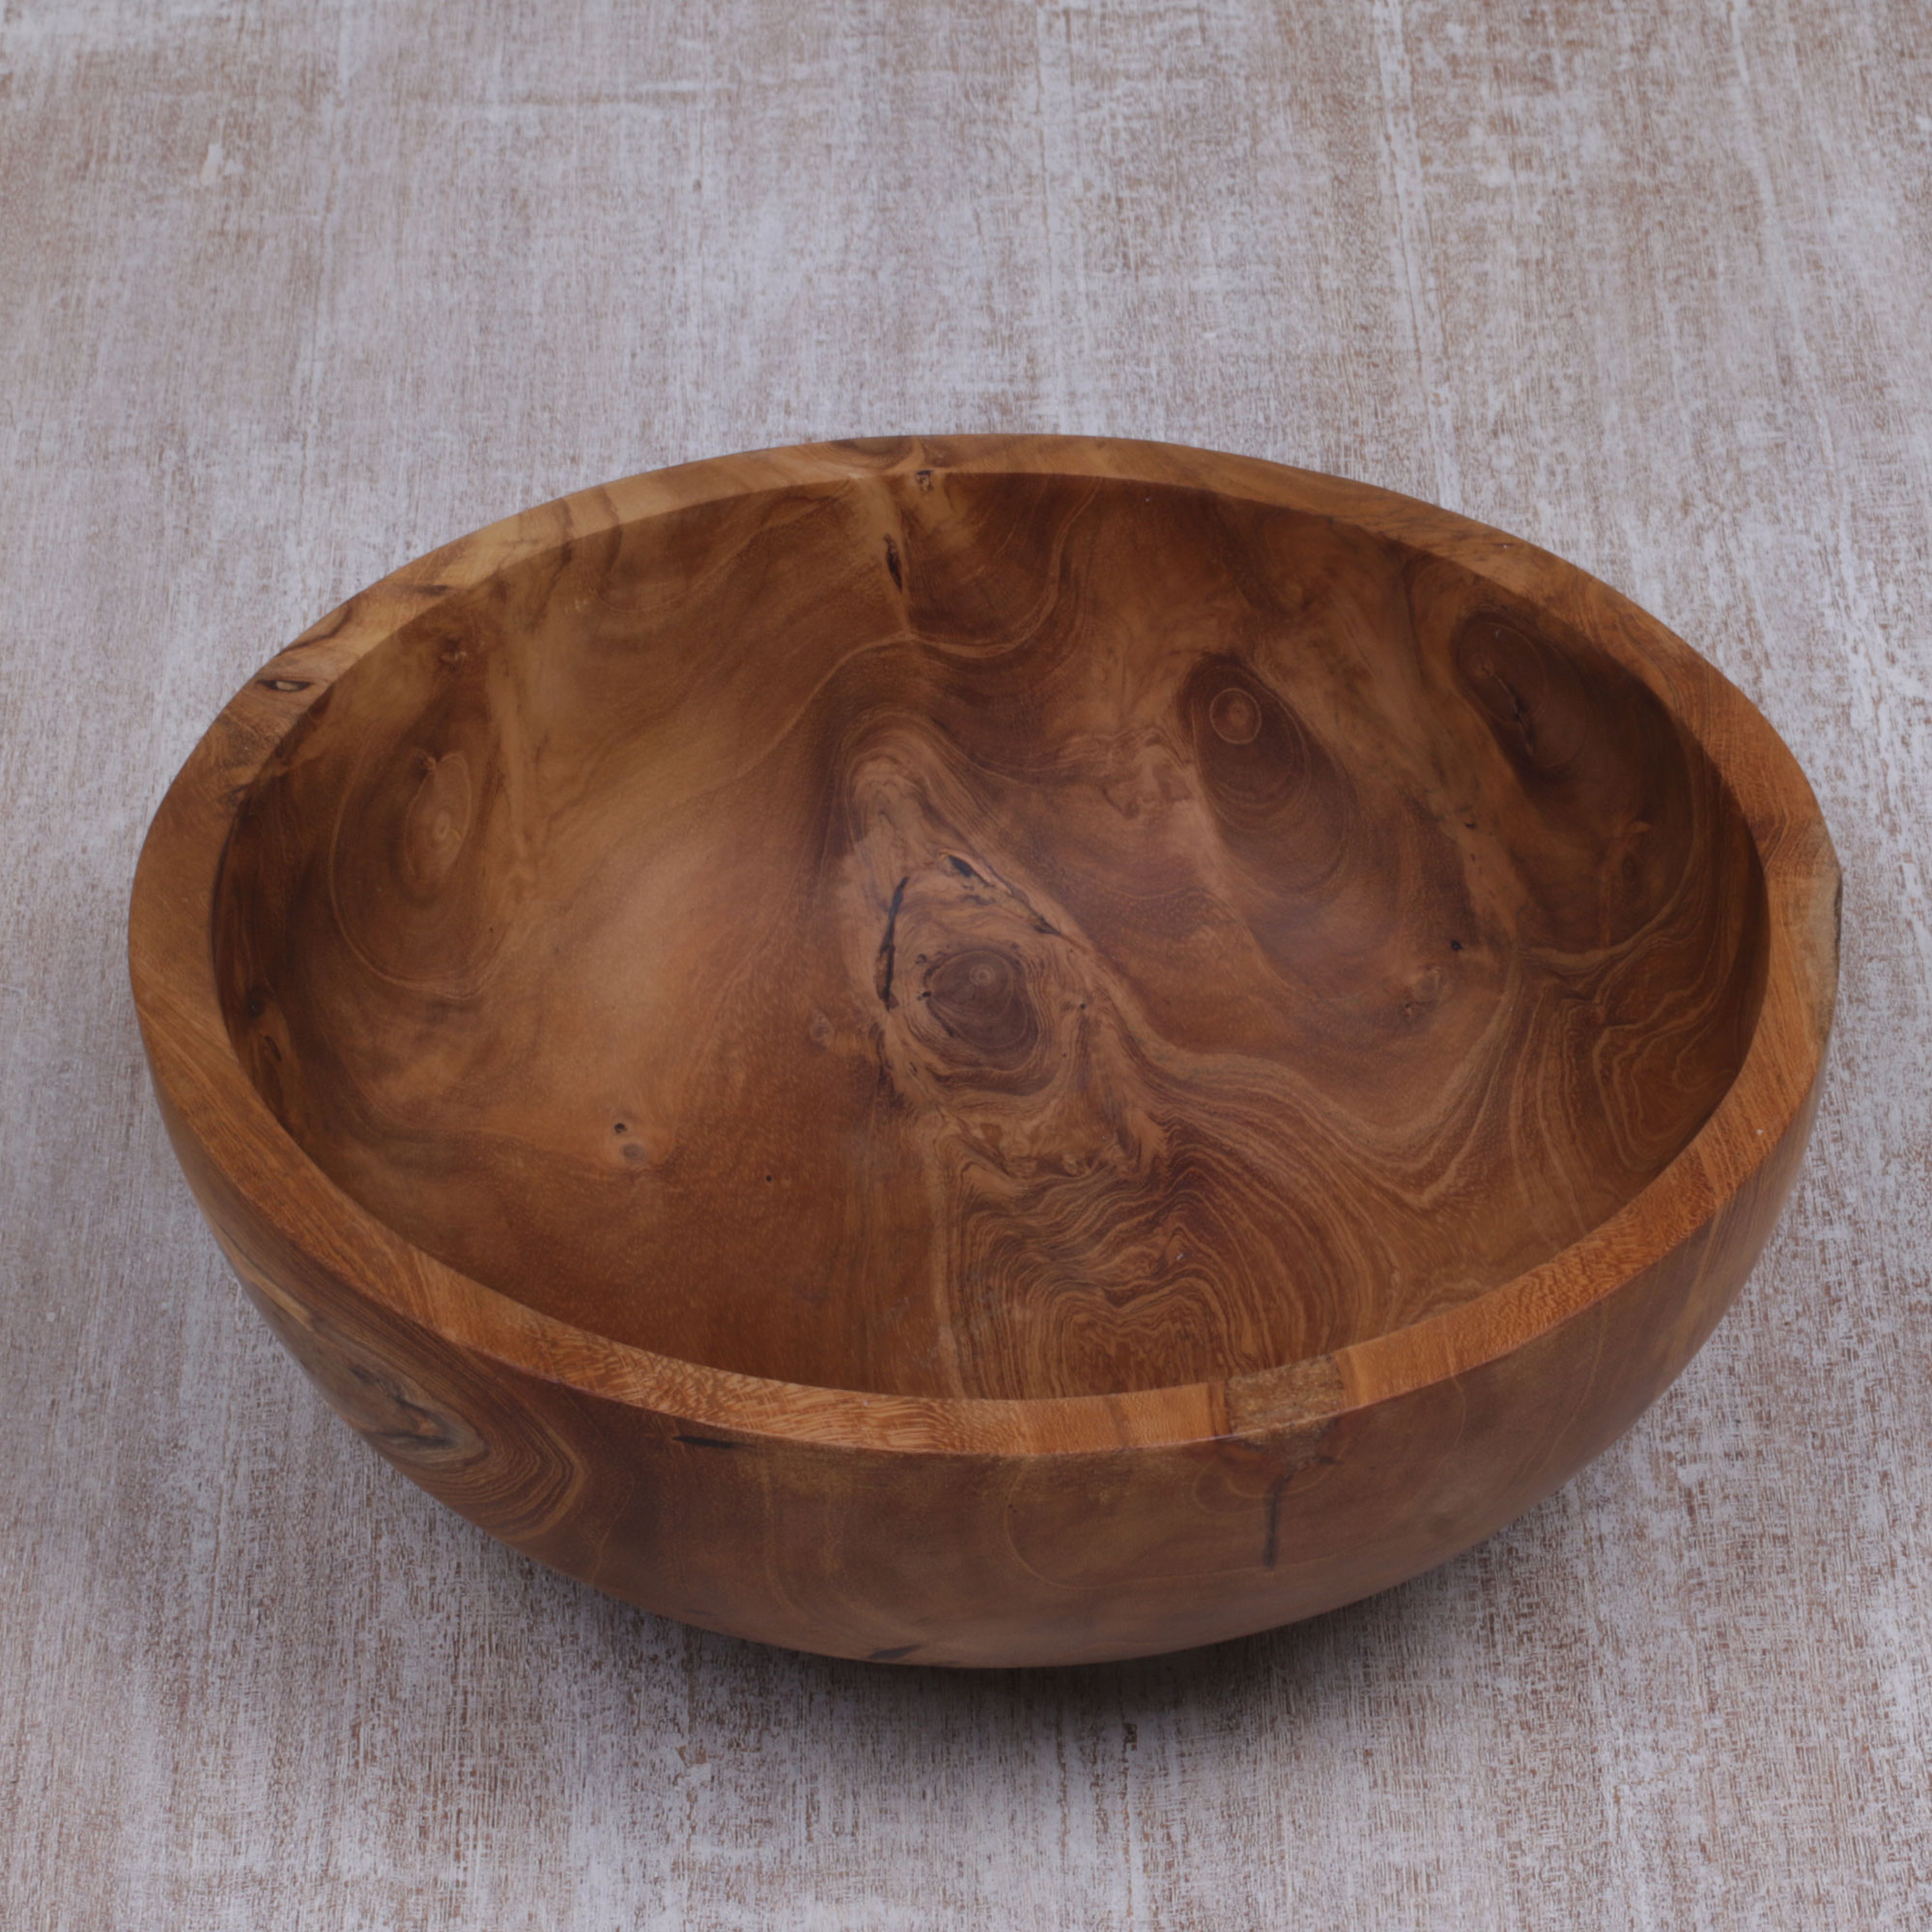 Handcarved Teakwood Serving Bowl Naturally Finished Salad Bowl Pasta Bowl Perfect Gift Ideas